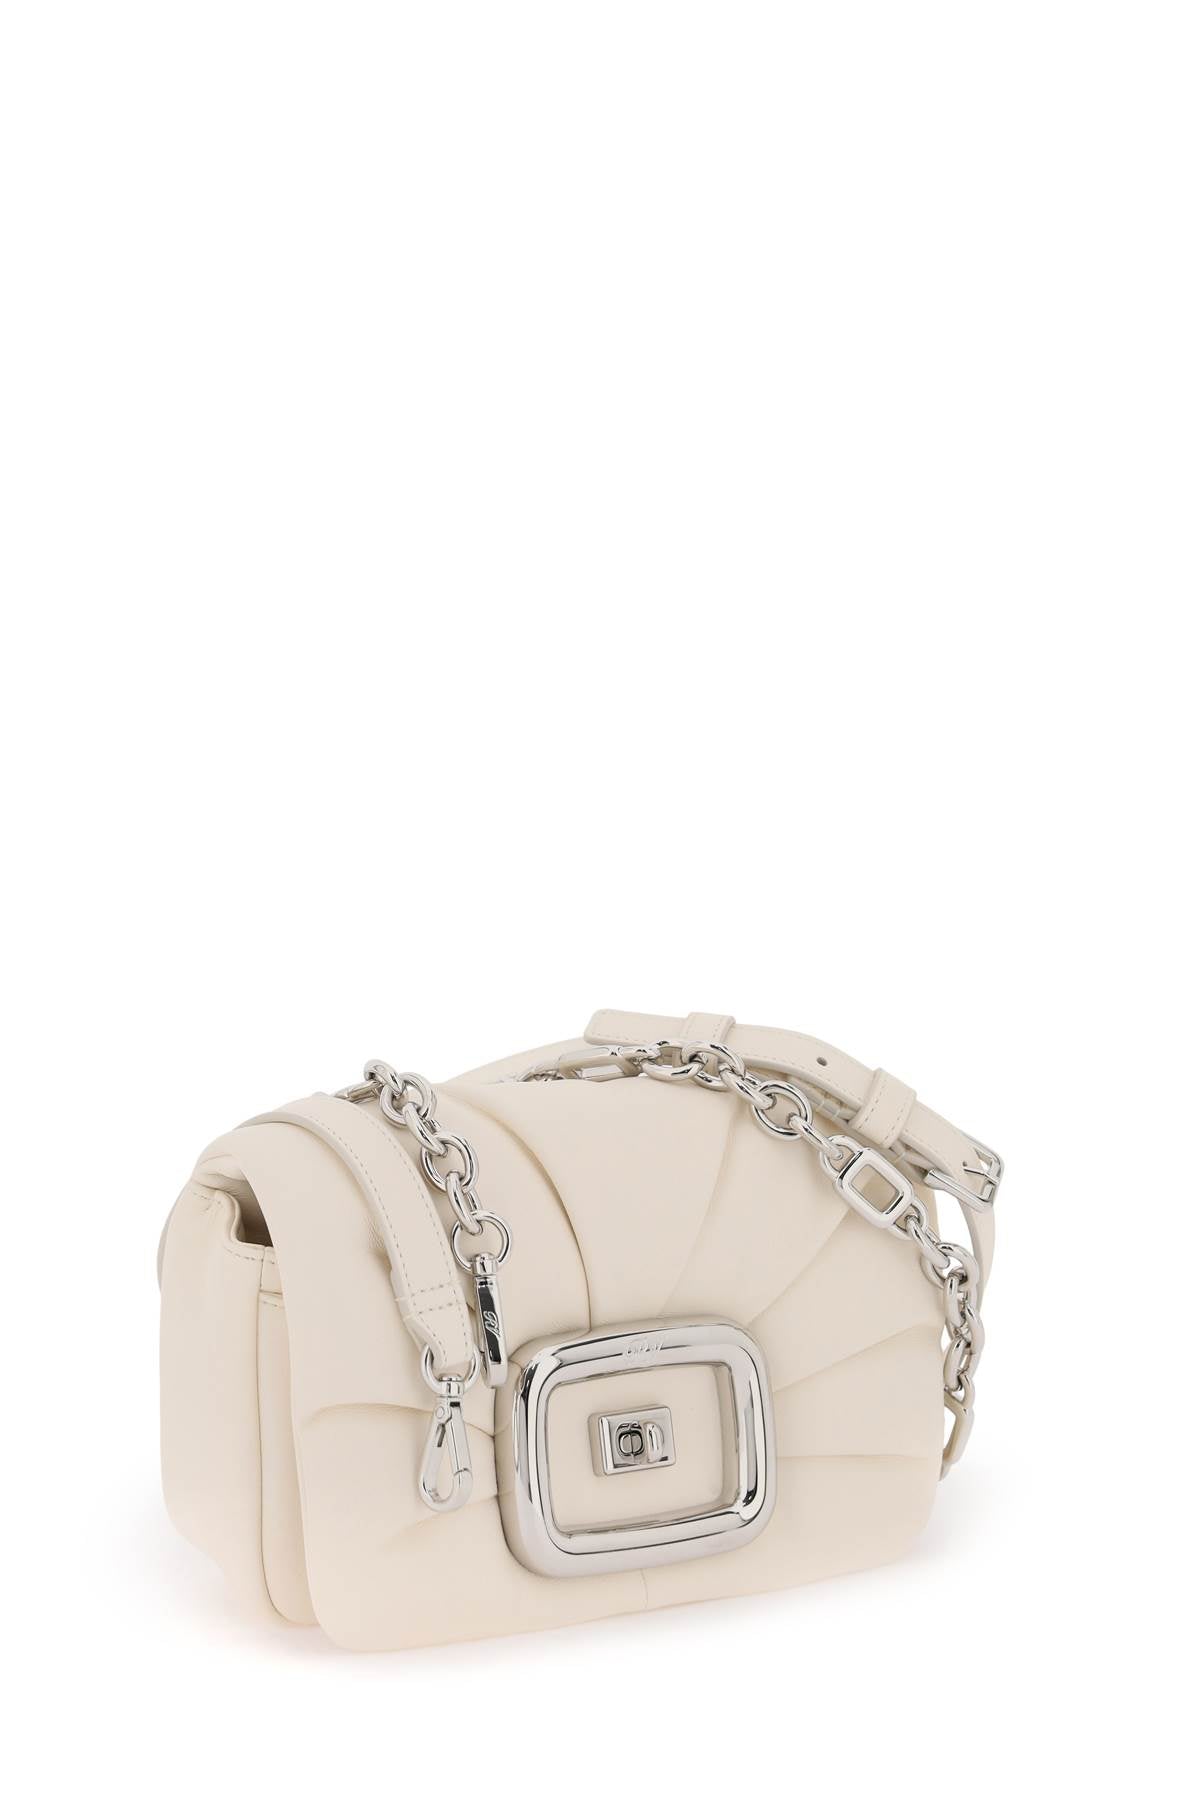 Creamy White Leather Ruched Shoulder Handbag with Chain Shoulder Strap